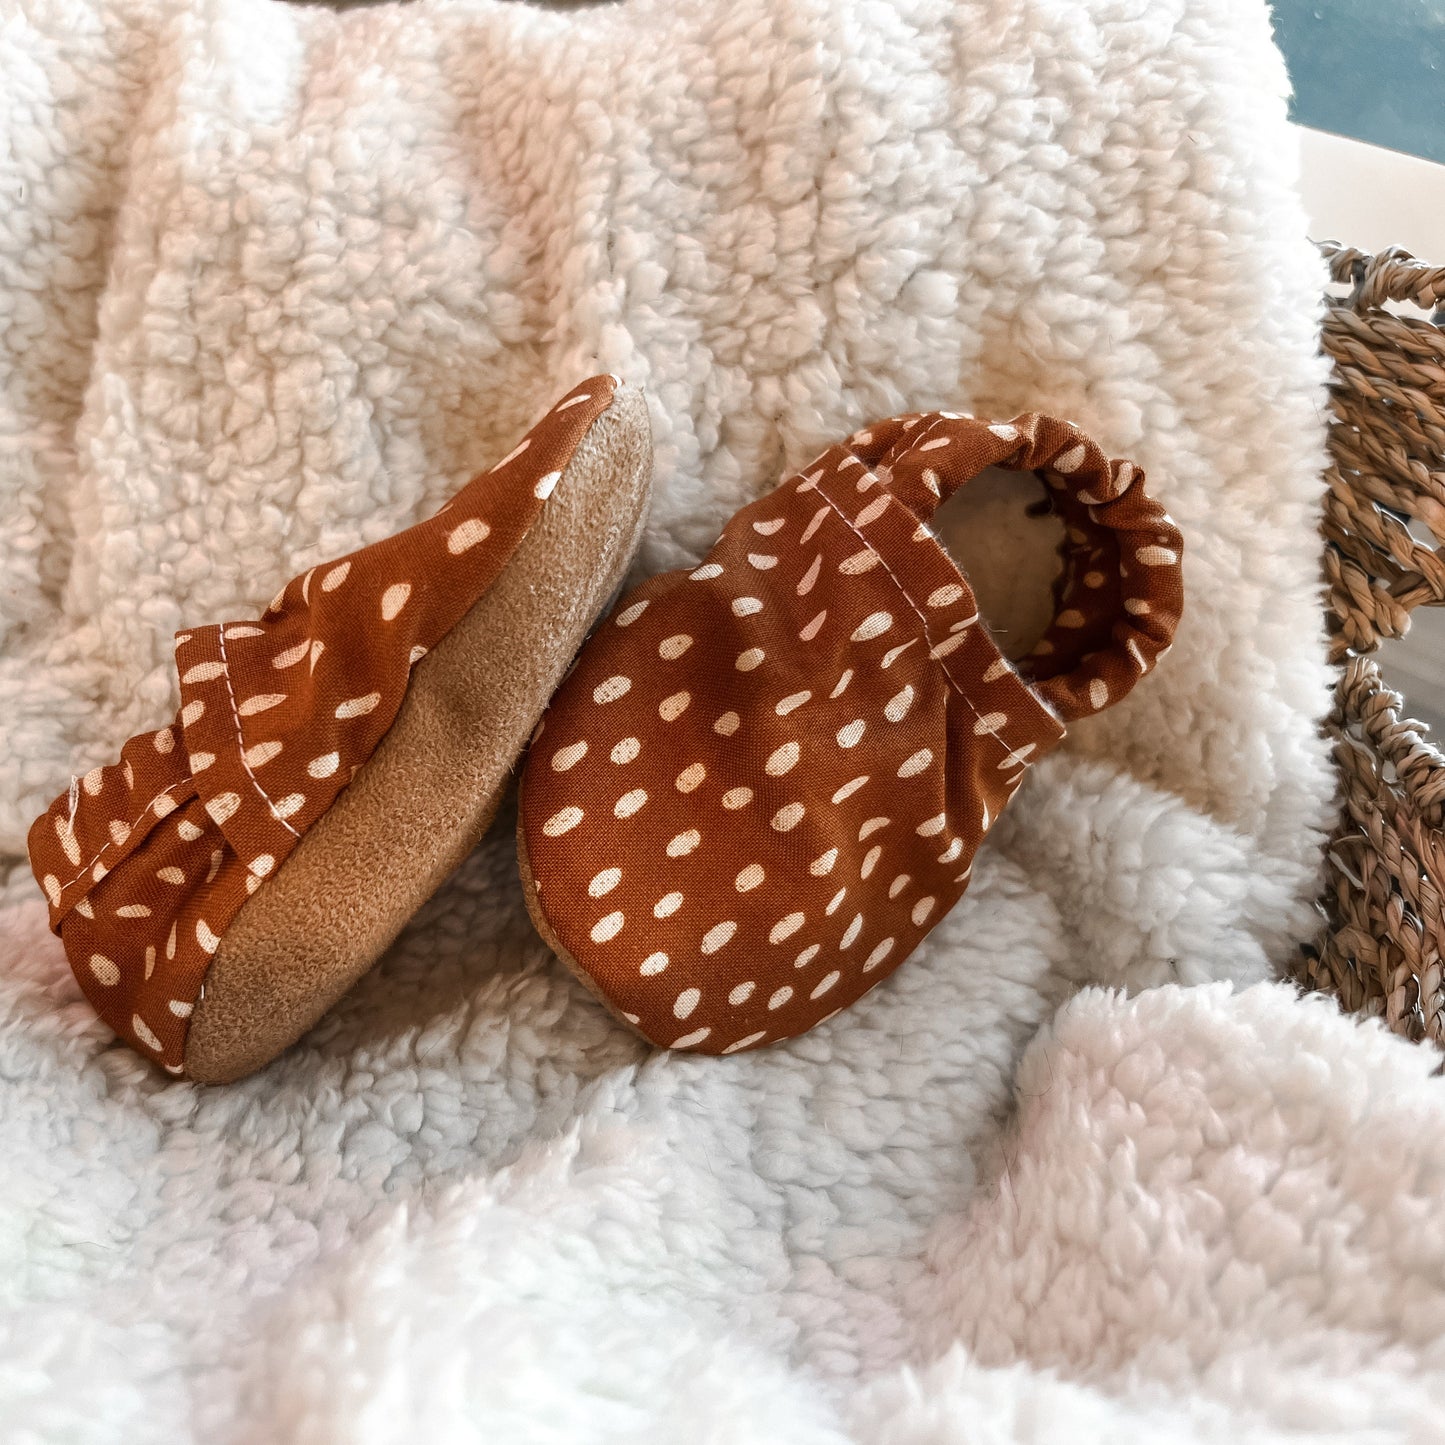 Baby Moccs, Rust Bambii Dot, Baby Booties, Crib Shoes, Soft Sole Shoes, Barefoot Shoes, Baby Shoes, Moccasins, Trendy Baby, Baby Gift